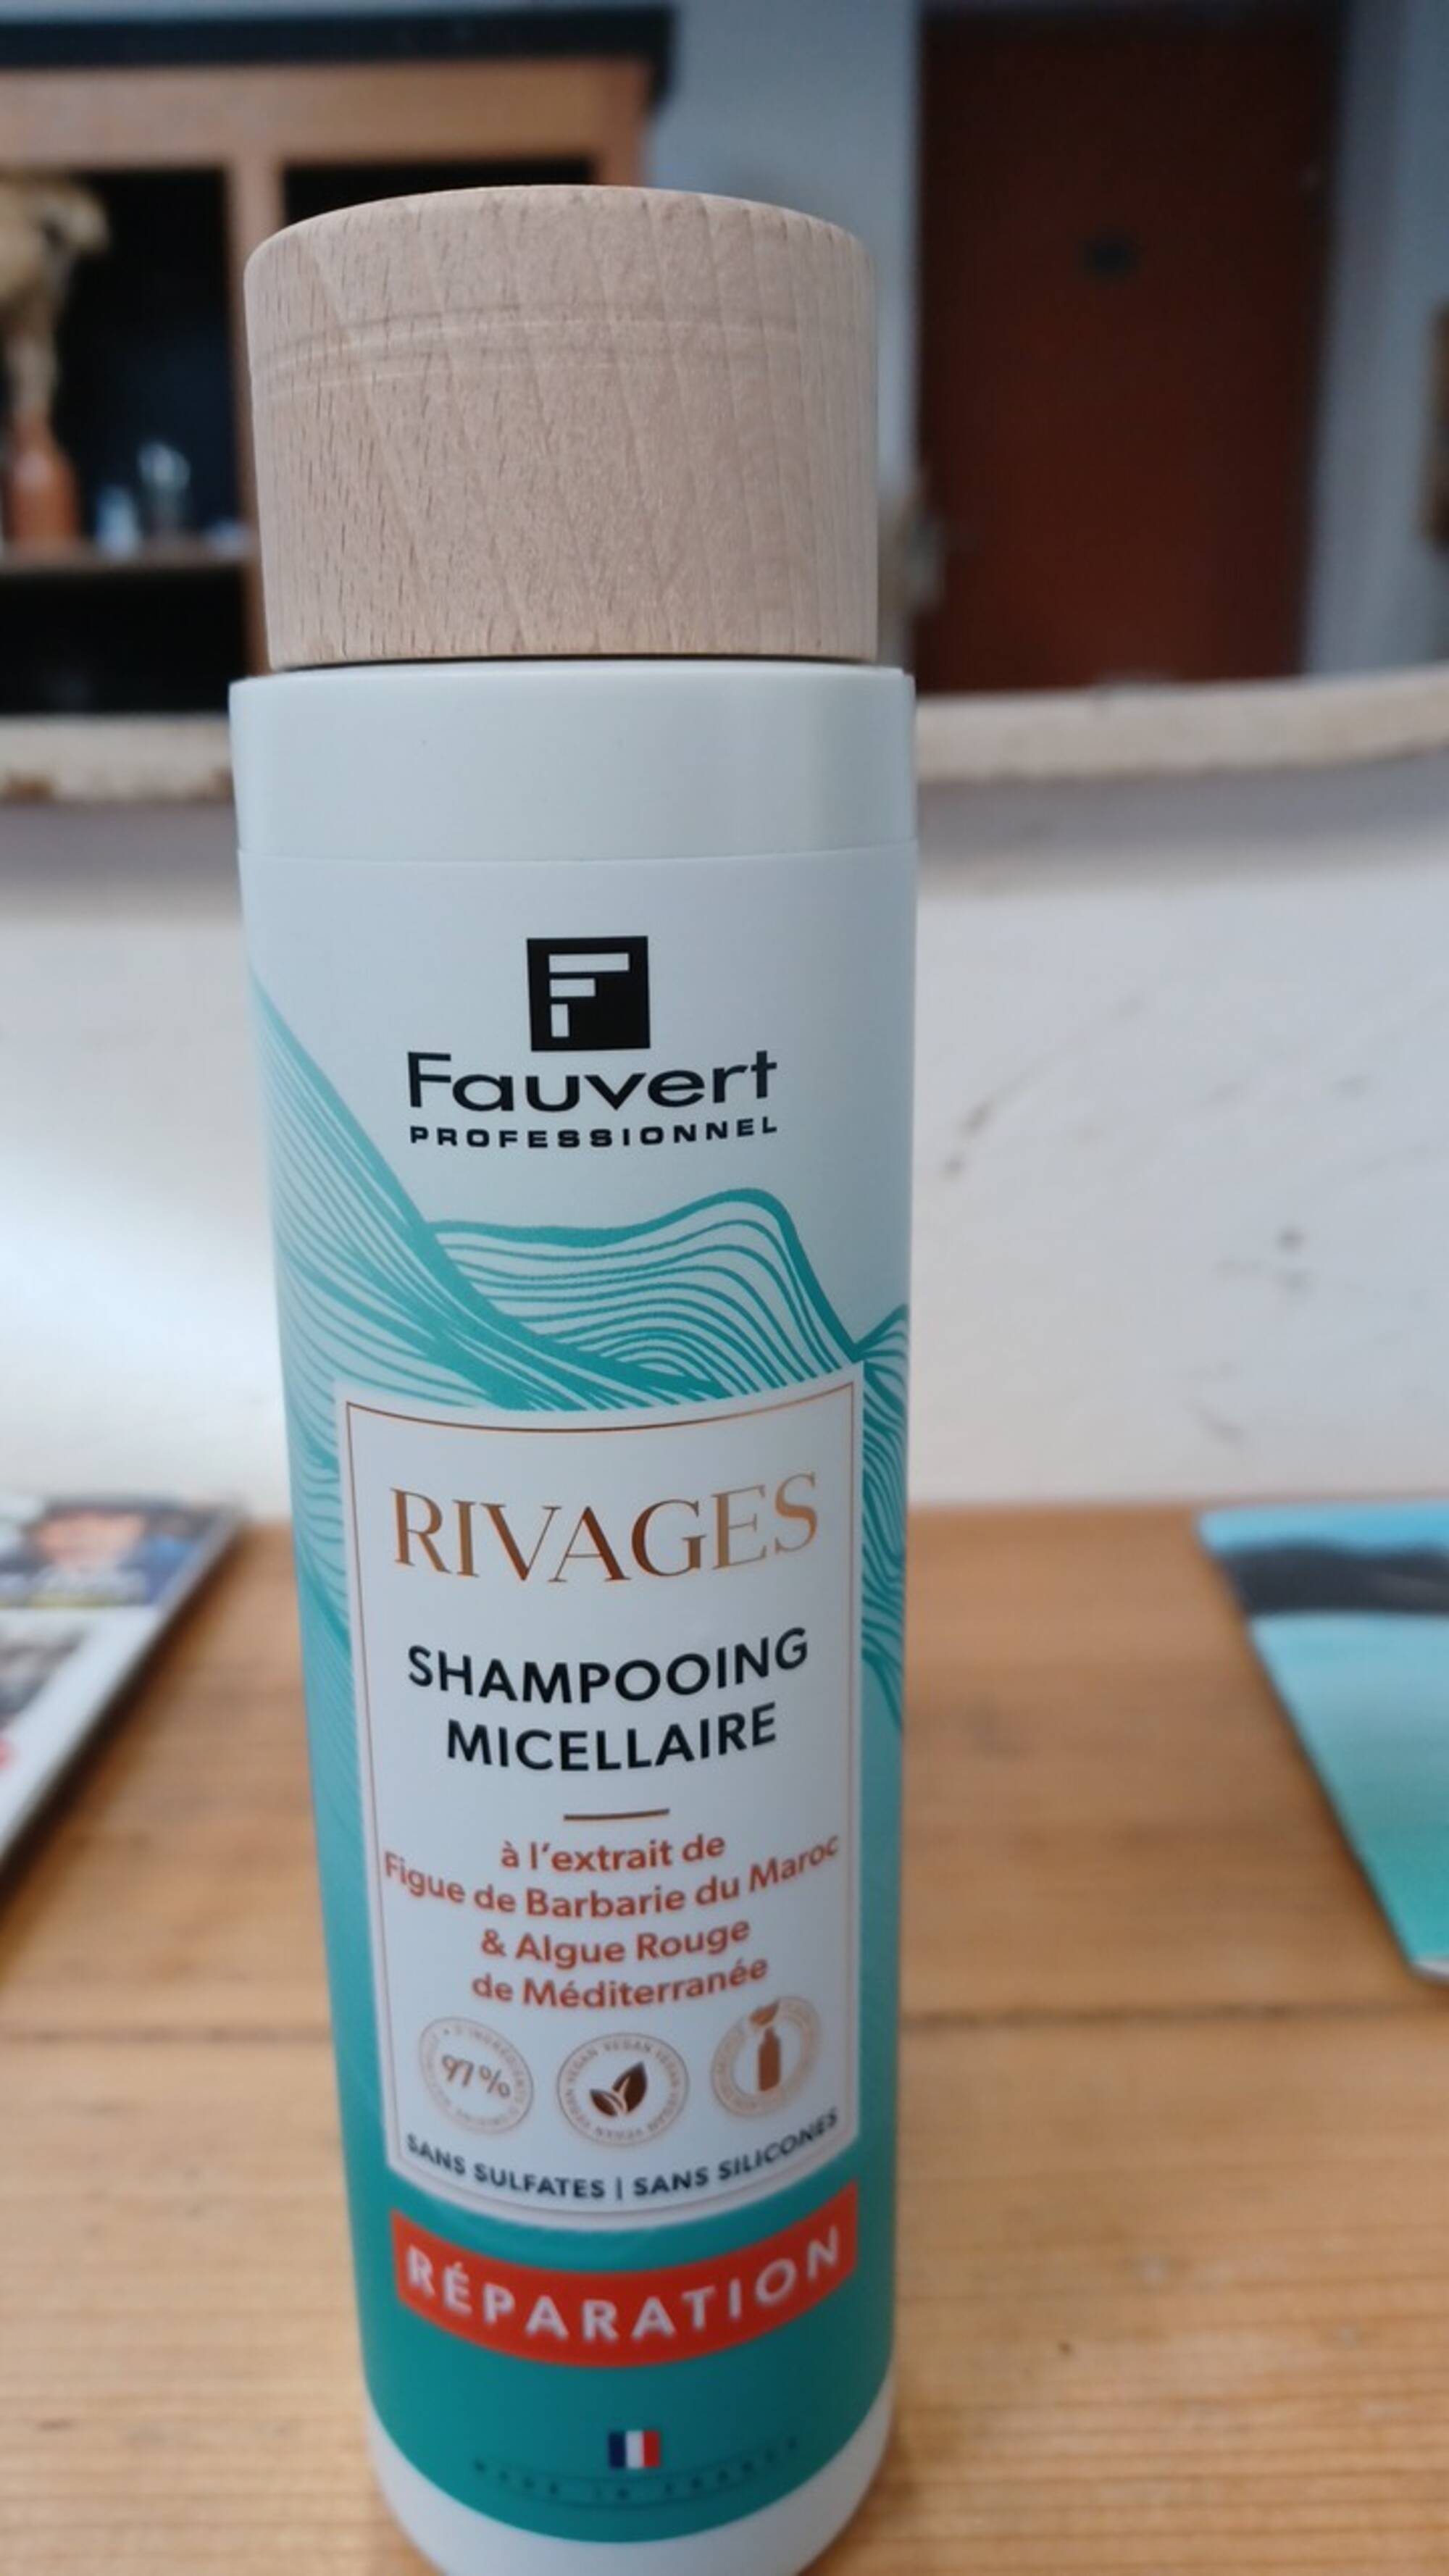 FAUVERT PROFESSIONNEL - Rivages - Shampooing micellaire